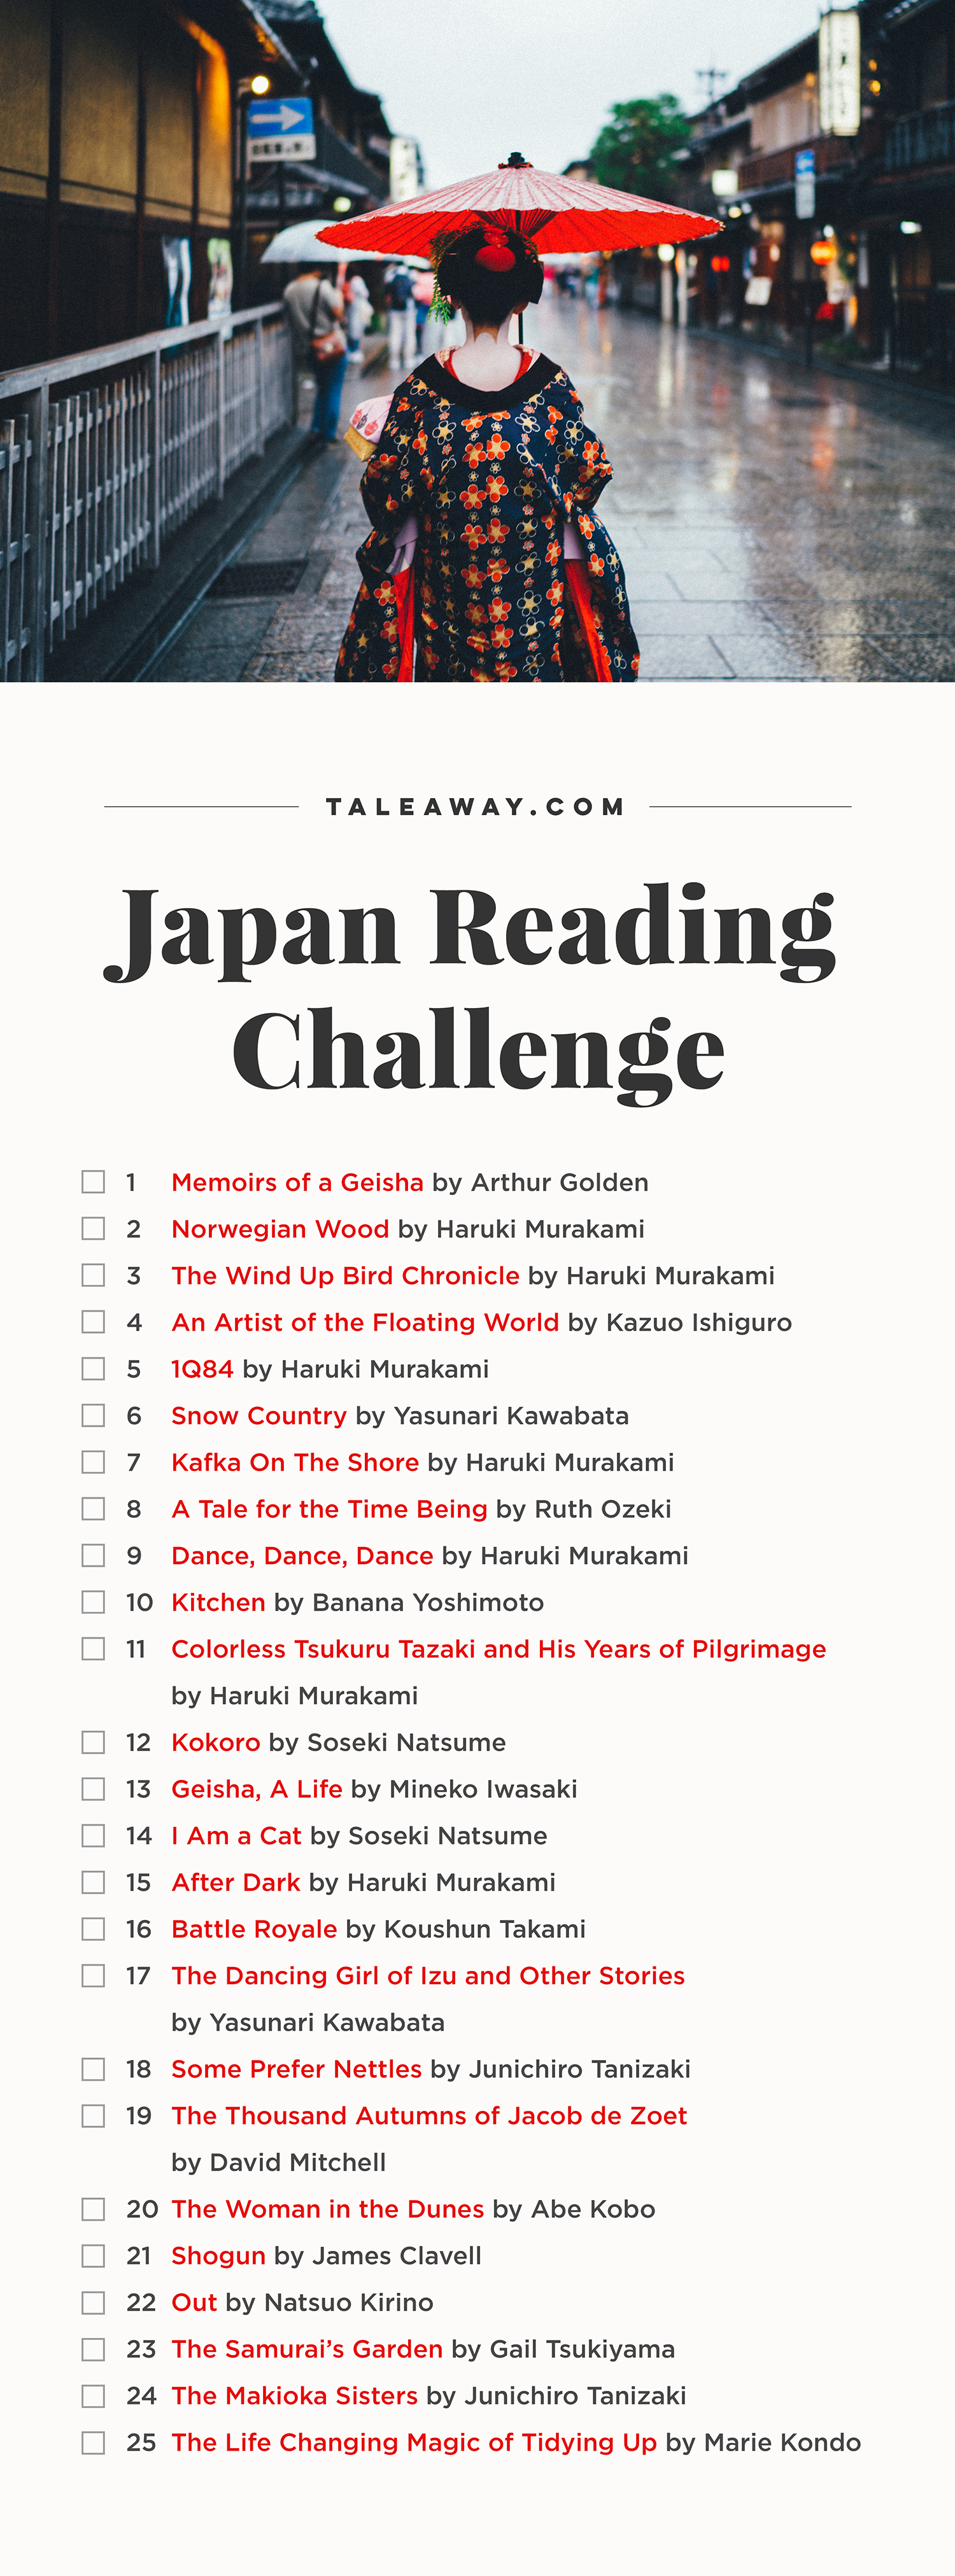 Japan Reading Challenge, Books Set In Japan - For more books visit www.taleway.com to find books set around the world. Ideas for those who like to travel, both in life and in fiction. reading challenge, japan reading challenge, book challenge, books you must read, books from around the world, world books, books and travel, travel reading list, reading list, books around the world, books to read, japan books, japan books novels, japan travel